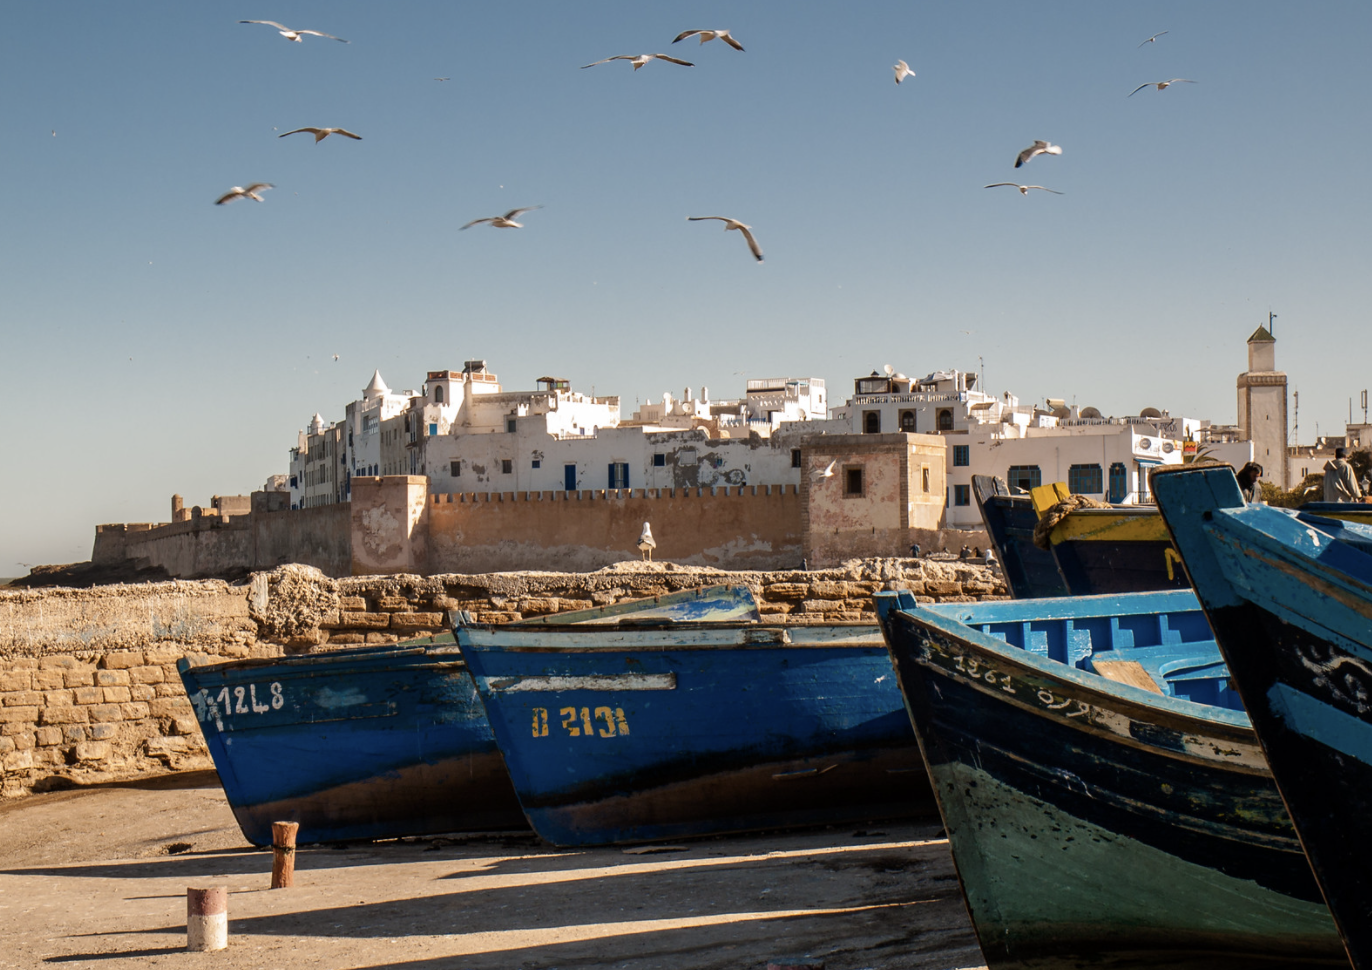 Morocco's Essaouira: The Tolerant City Where Things Have Always Been Done Differently